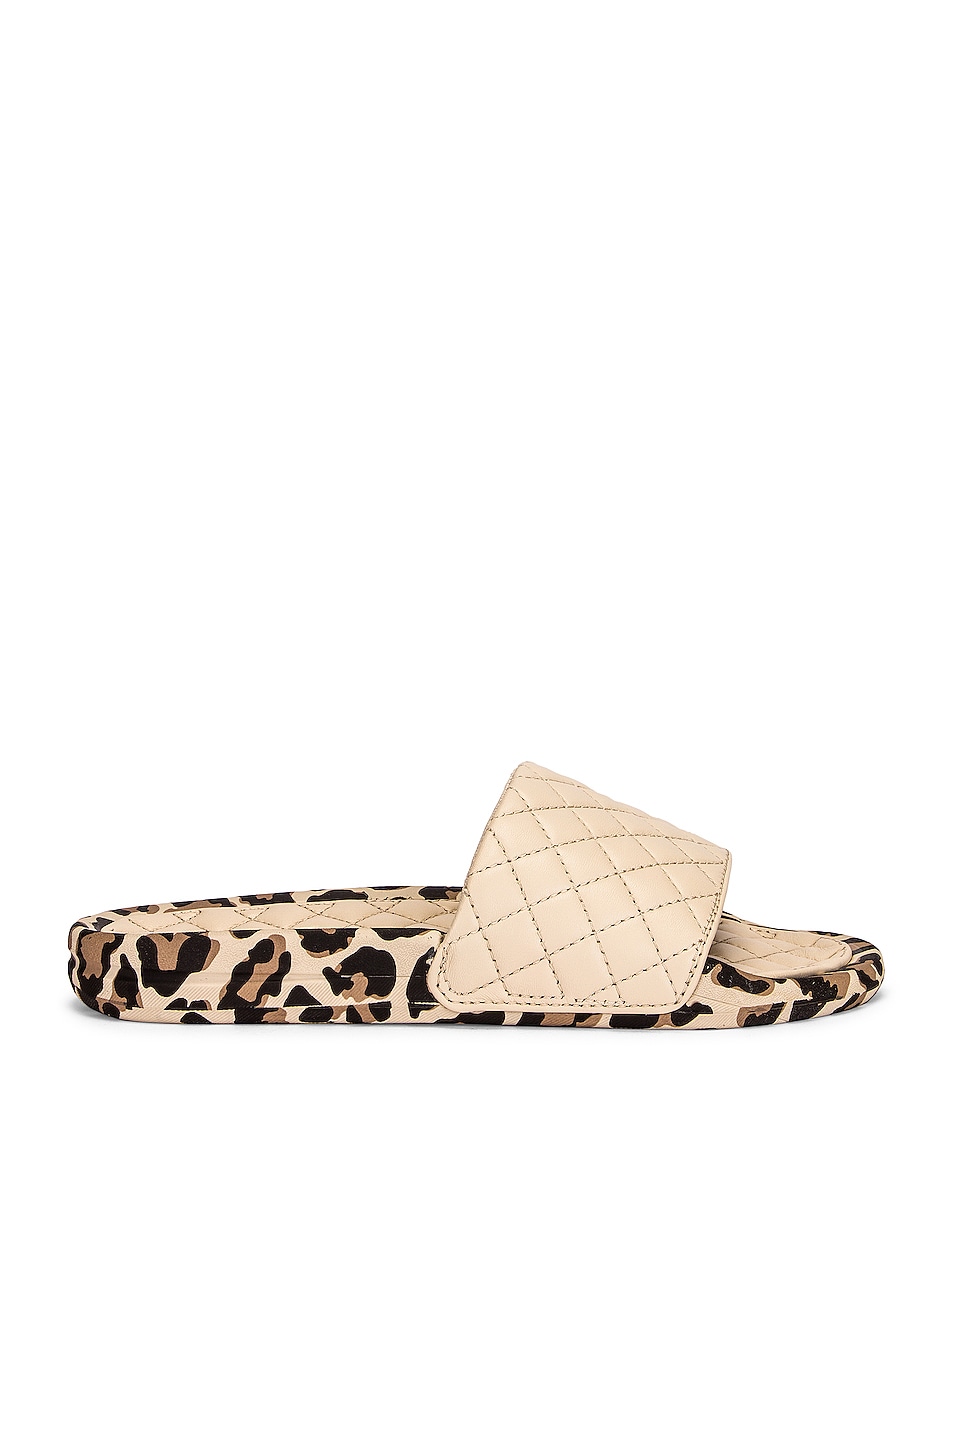 Image 1 of APL: Athletic Propulsion Labs Lusso Slide in Parchment & Leopard